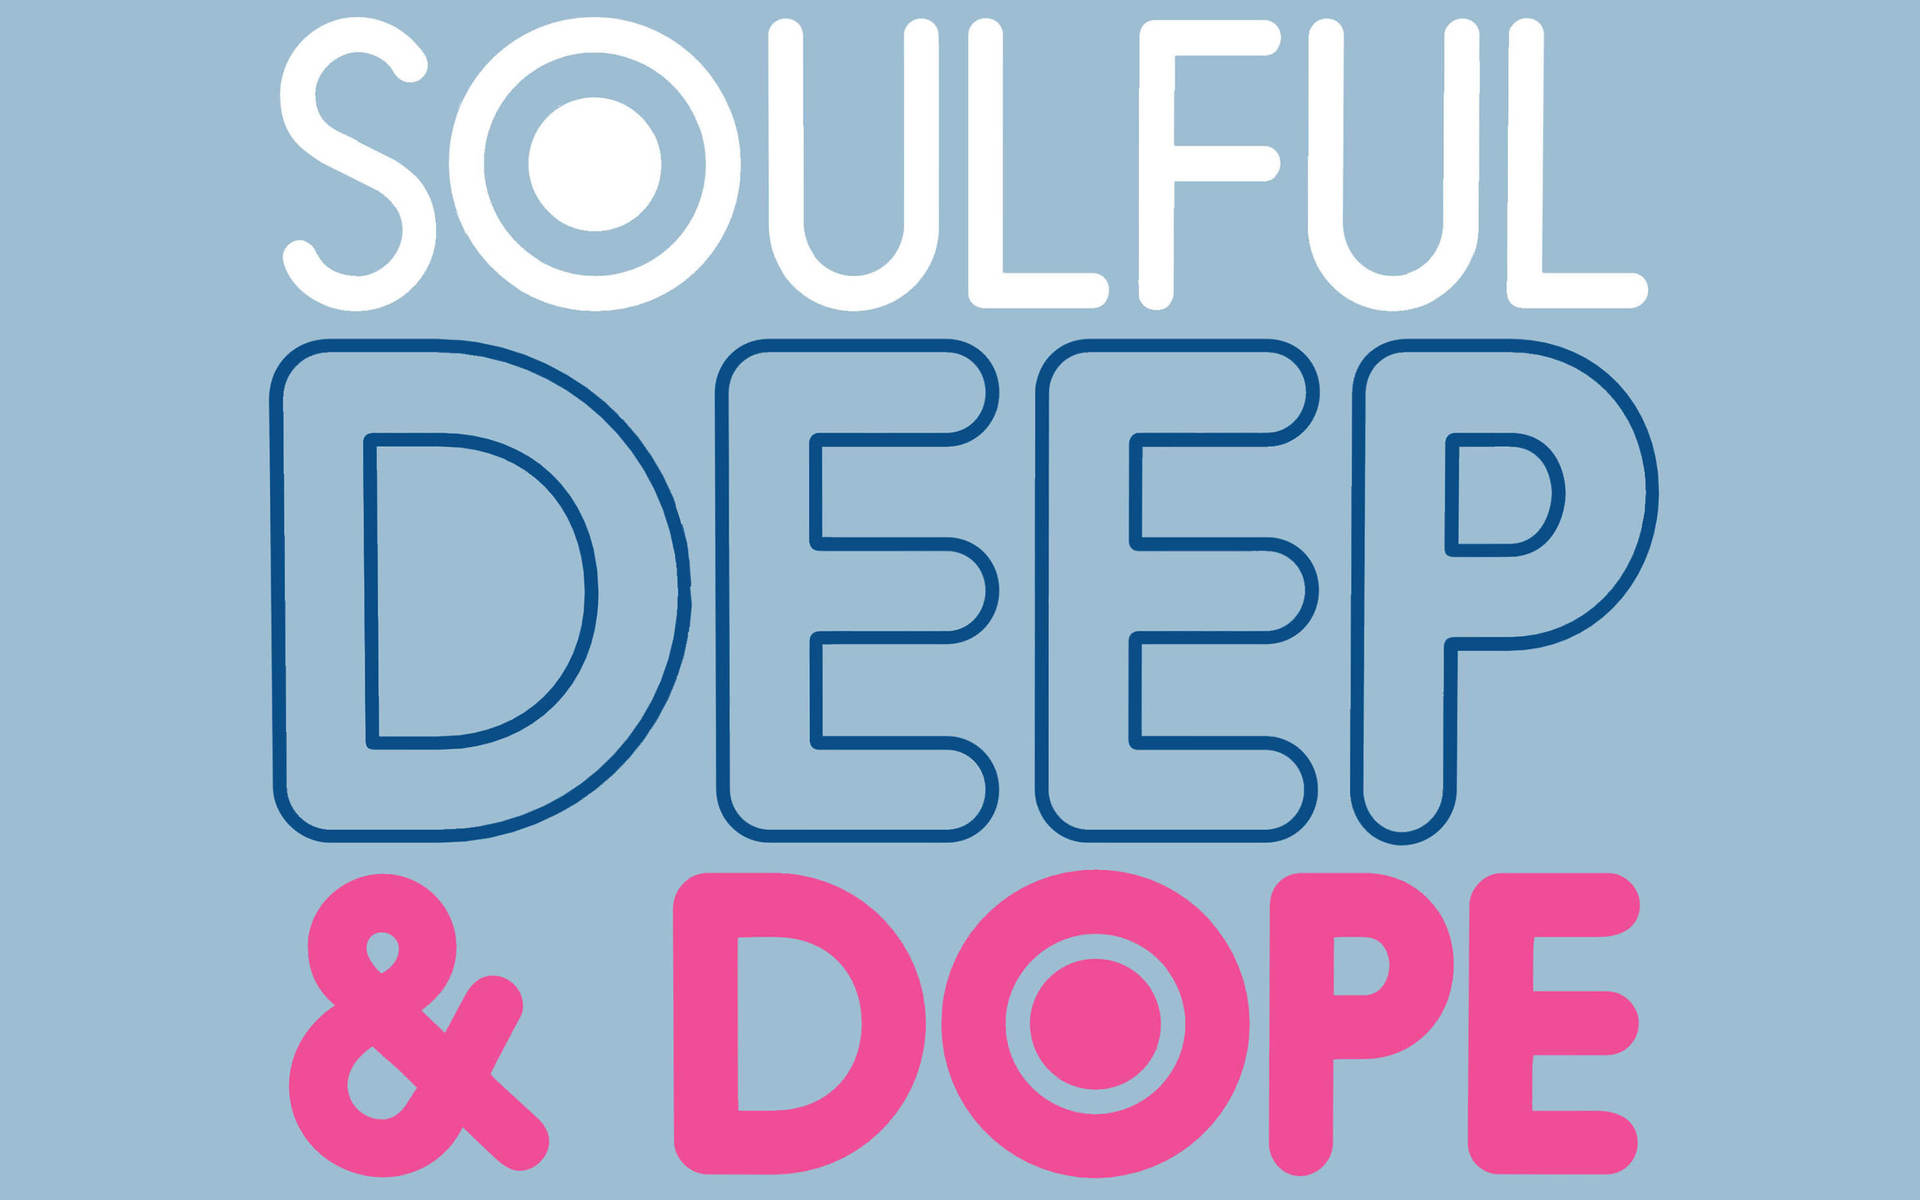 Reel People Music release latest compilation 'Soulful Deep & Dope